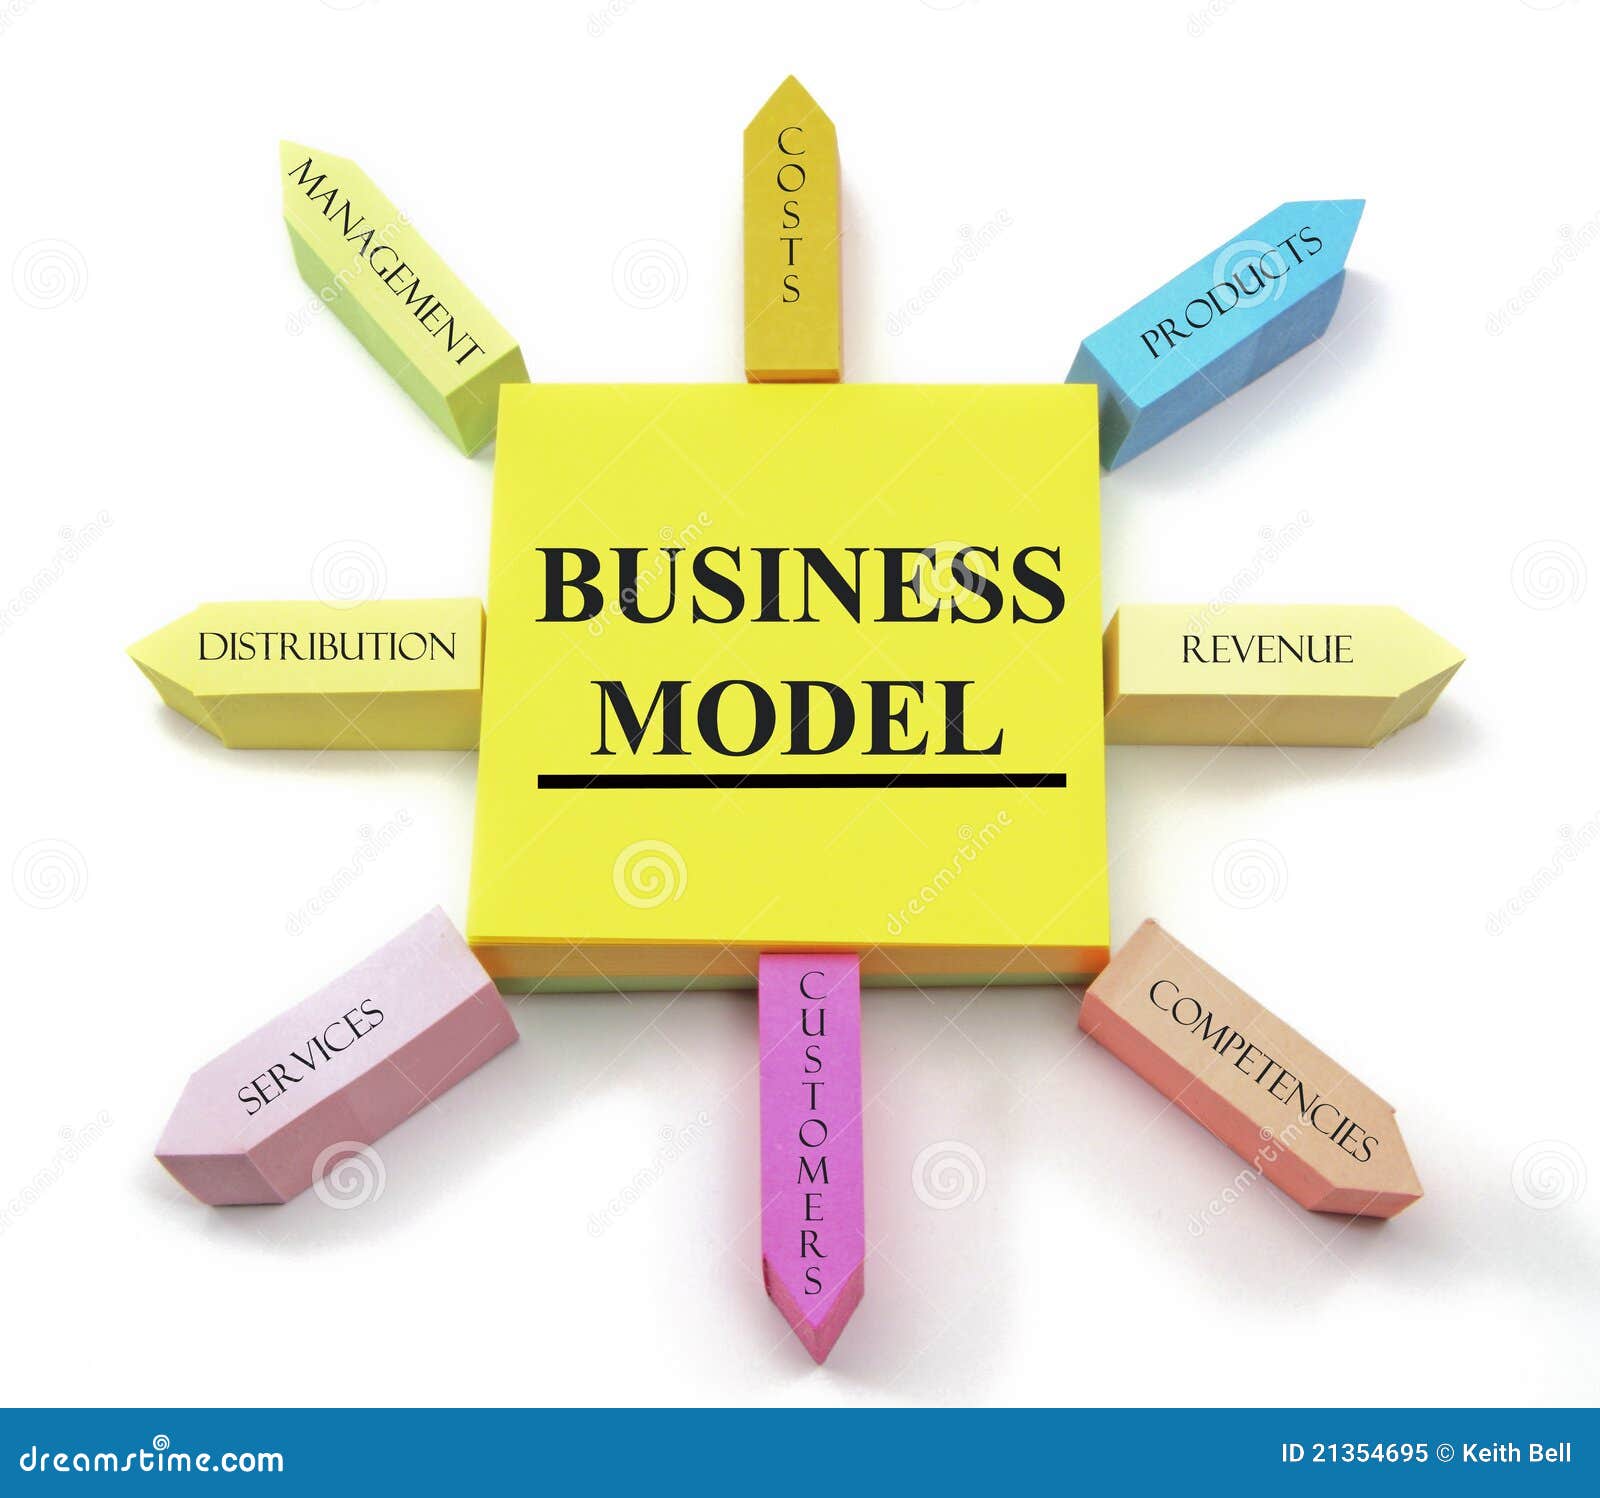 business model clipart - photo #2